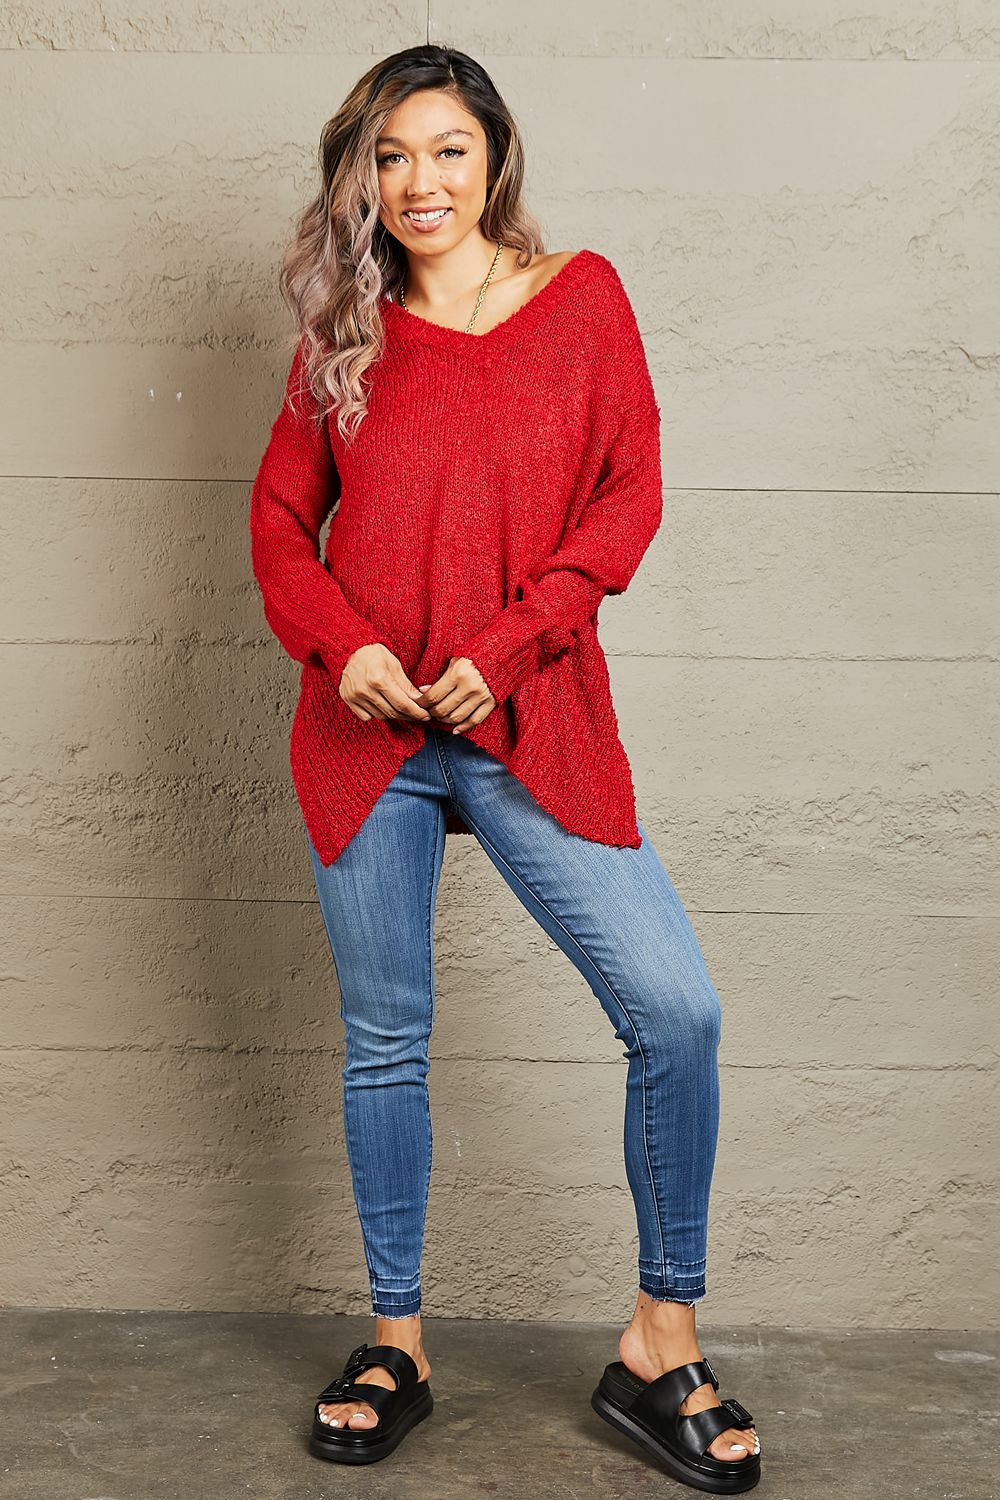 Heimish By The Fire Full Size Draped Detail Knit Sweater - Lola Cerina Boutique